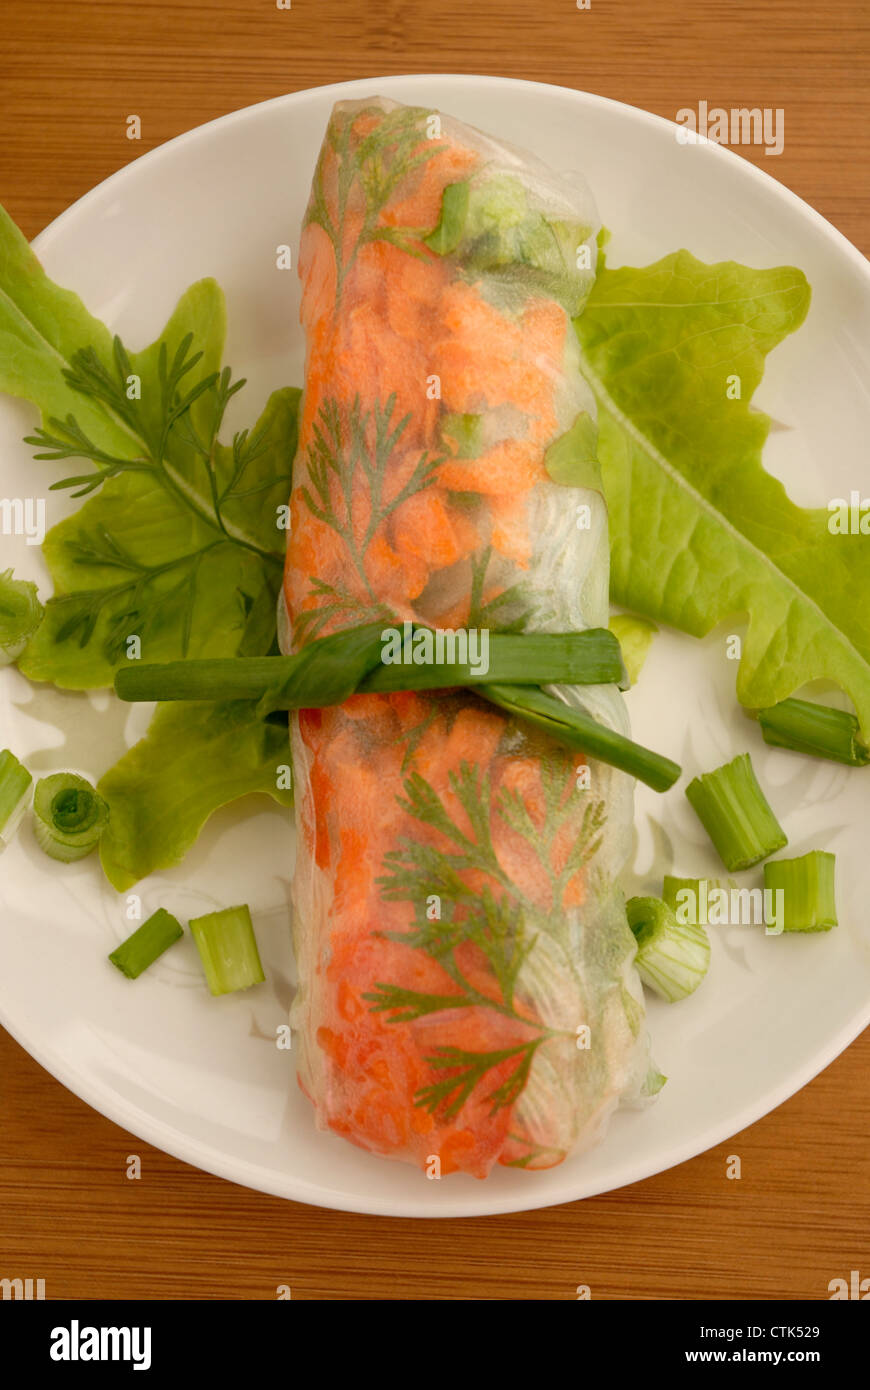 Vietnamese style Spring Roll, garnished and tied with a green onion. Stock Photo